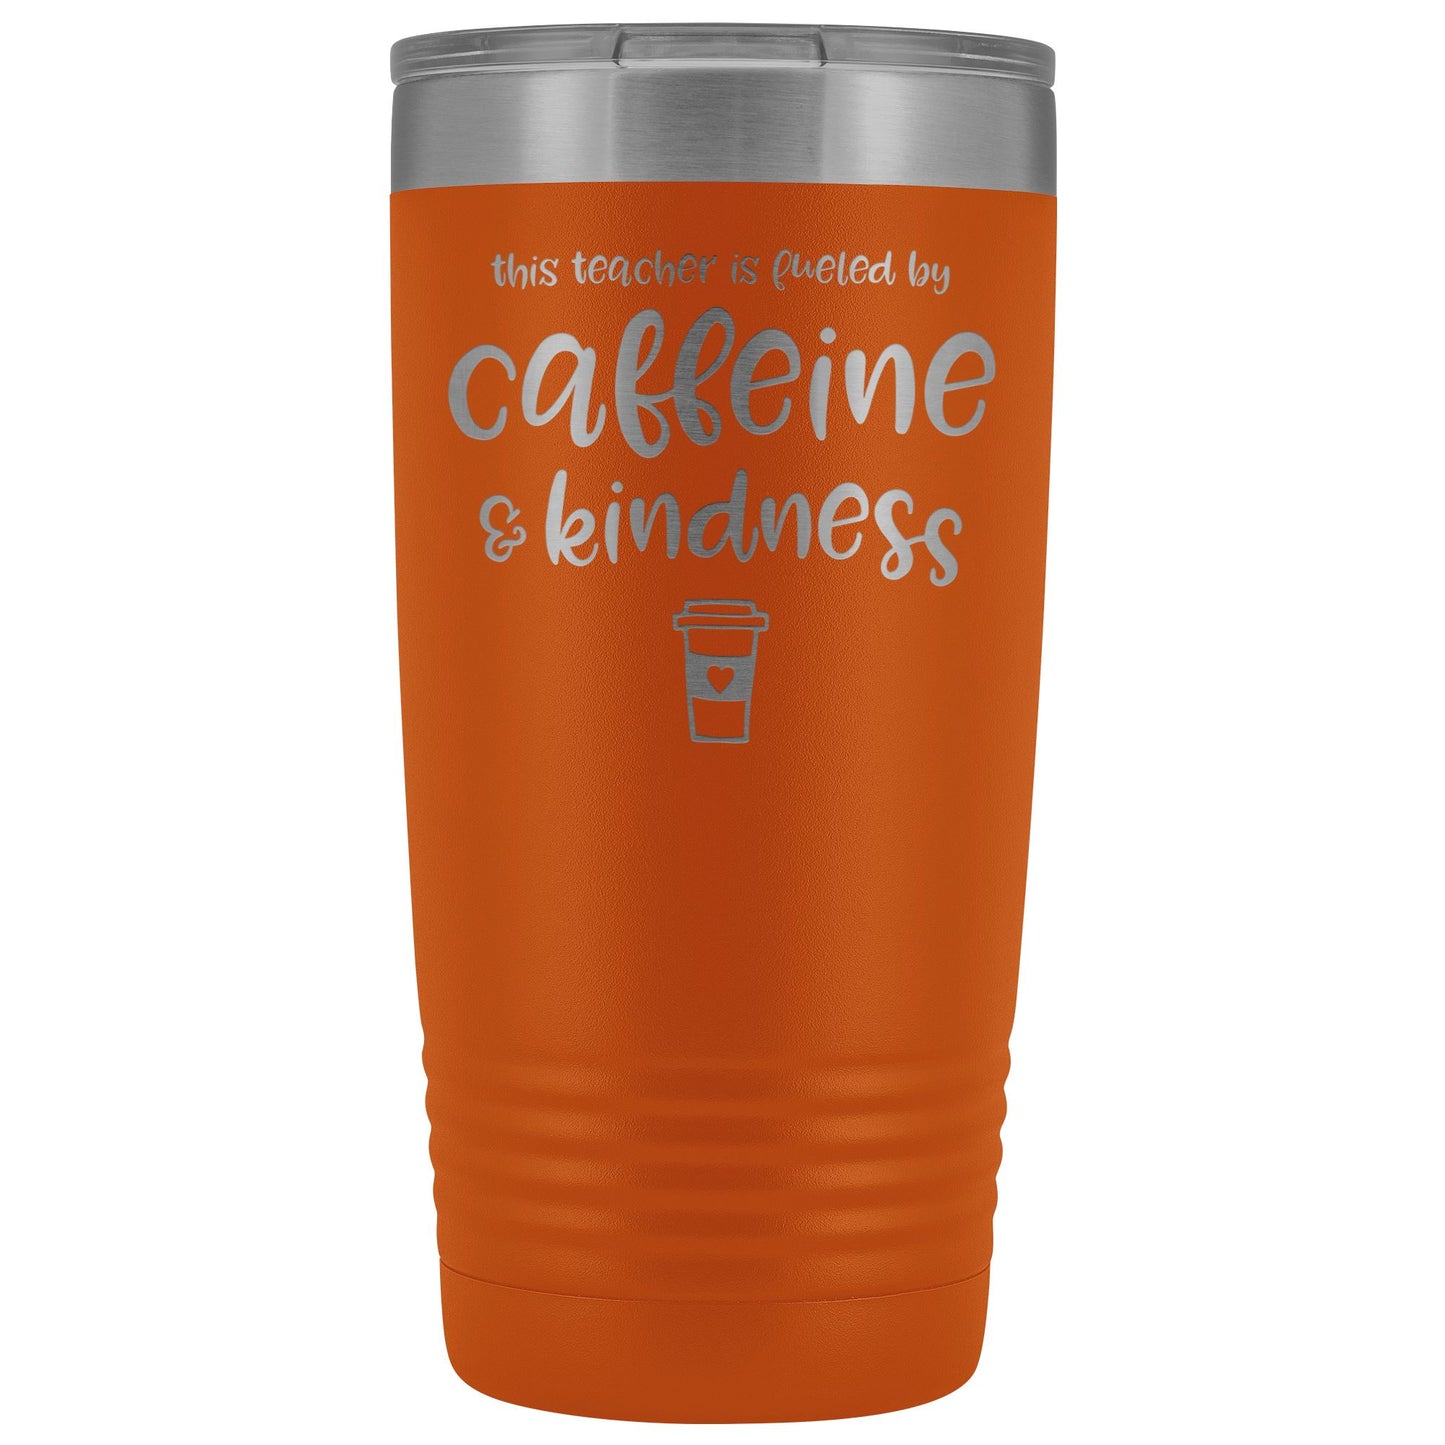 This Teacher is Fueled by Caffeine & Kindness 20oz Insulated Coffee Tumbler